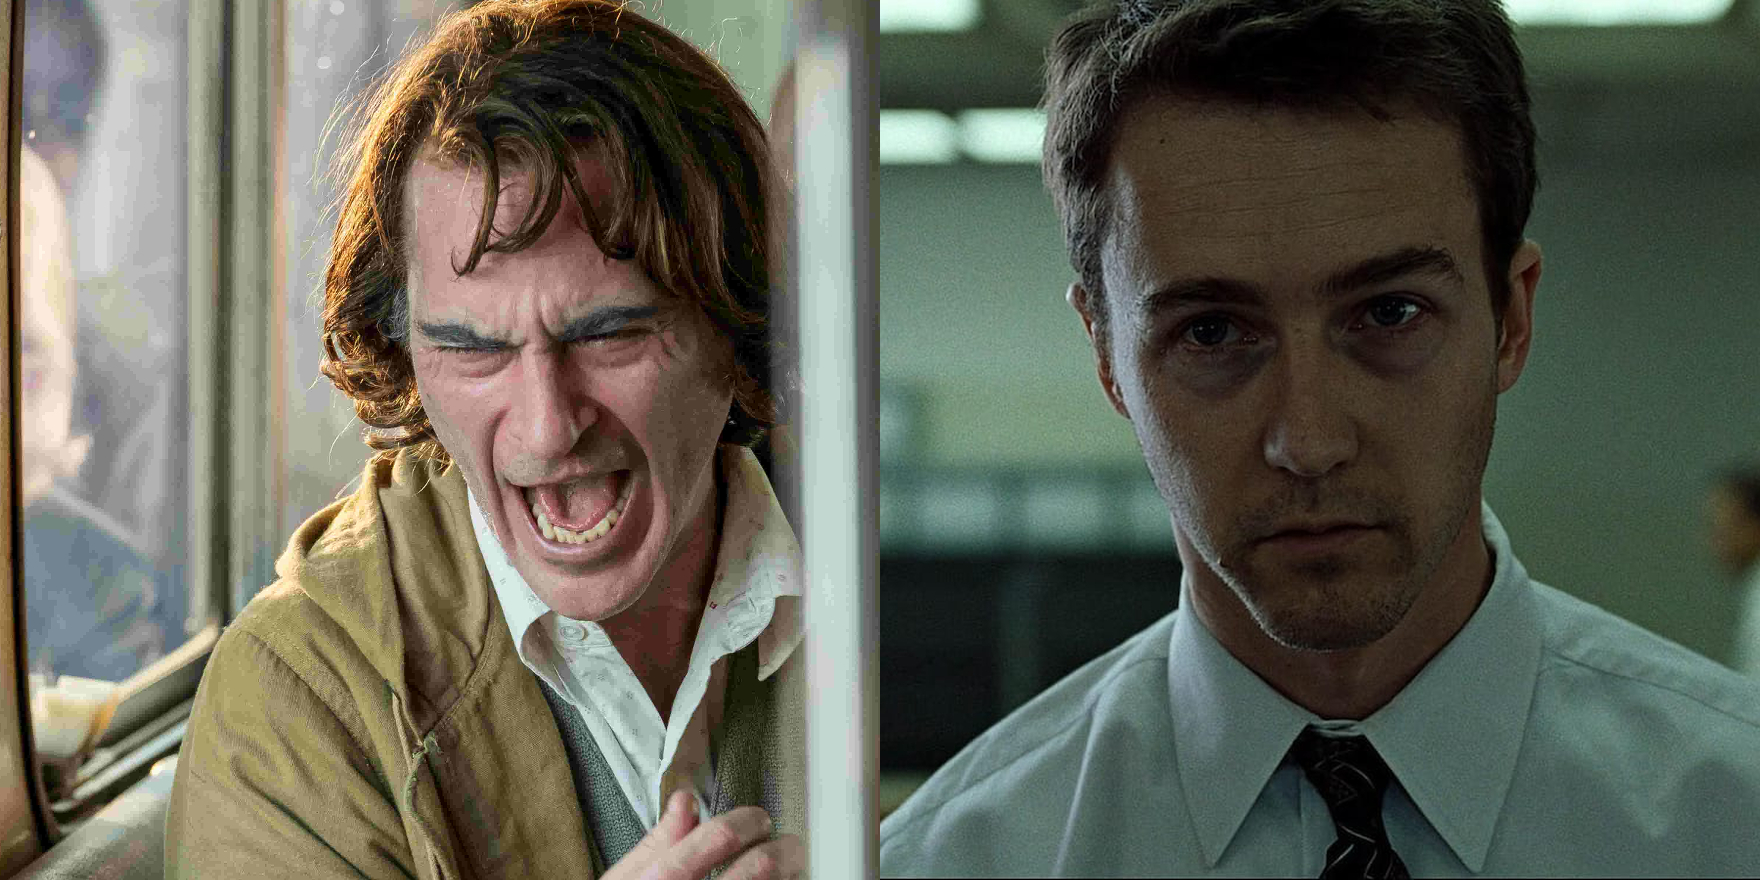 On Joker, Fight Club and the Danger of Self-Fulfilling Cautionary